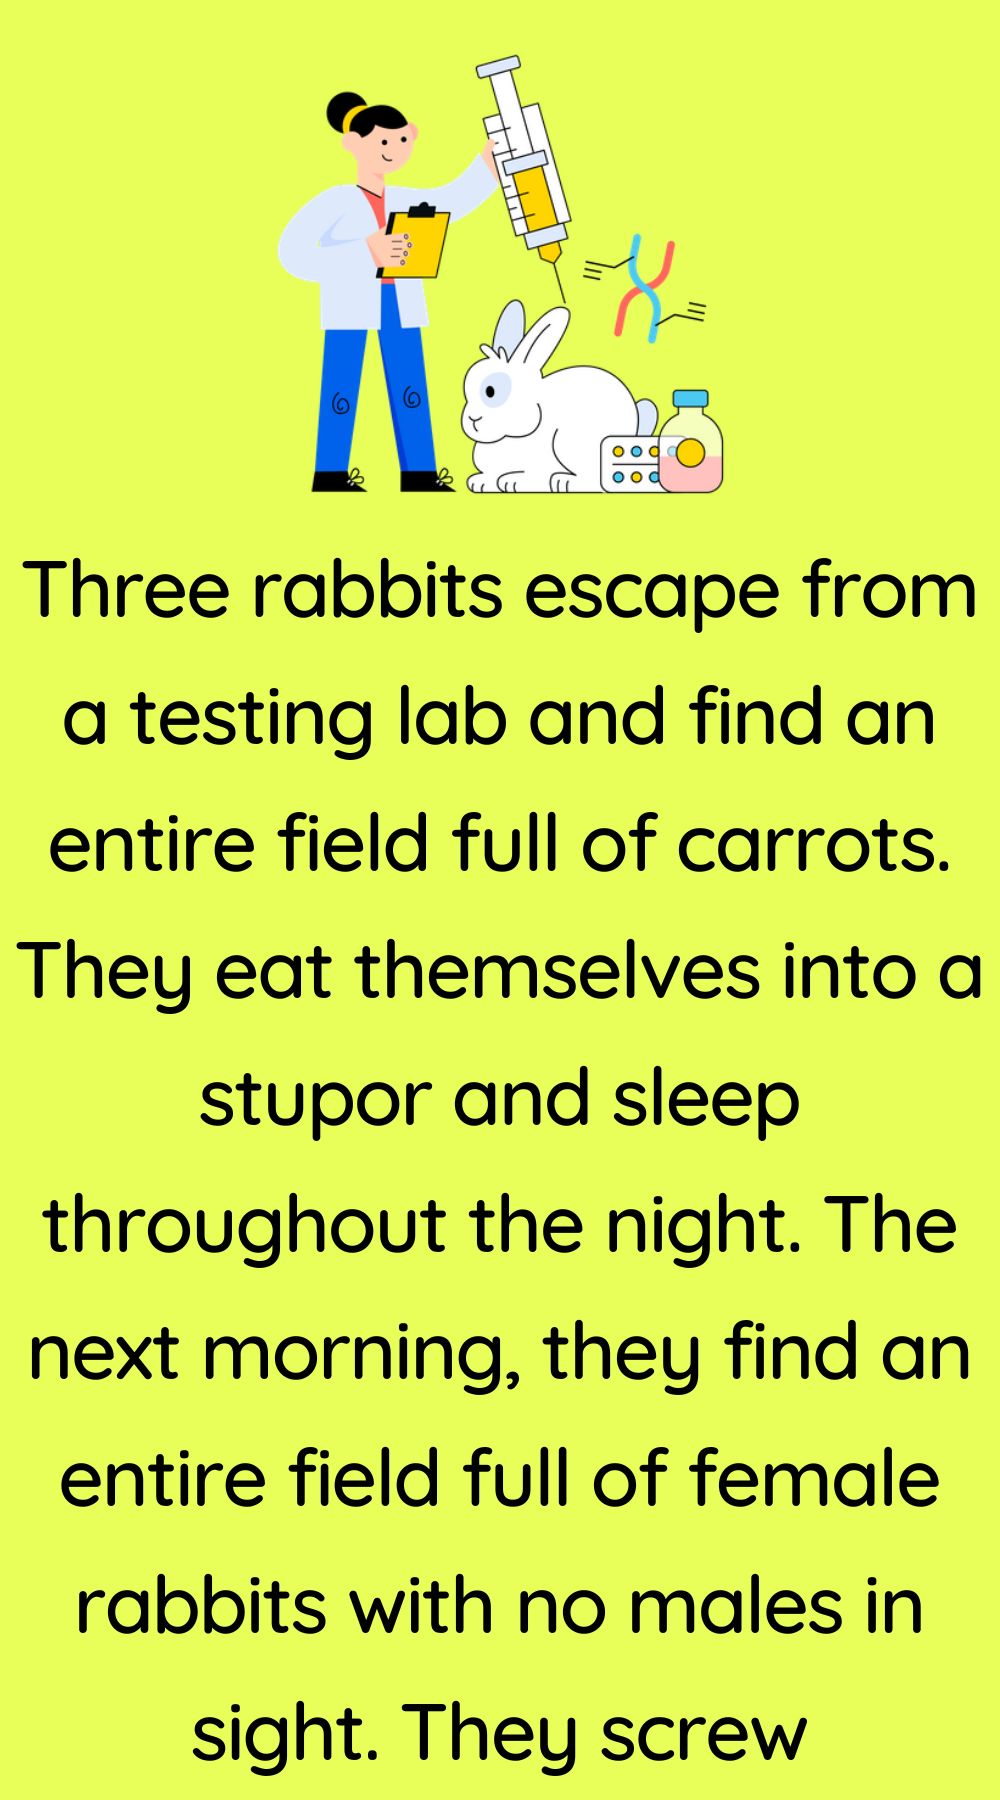 Three rabbits escape from a testing lab 